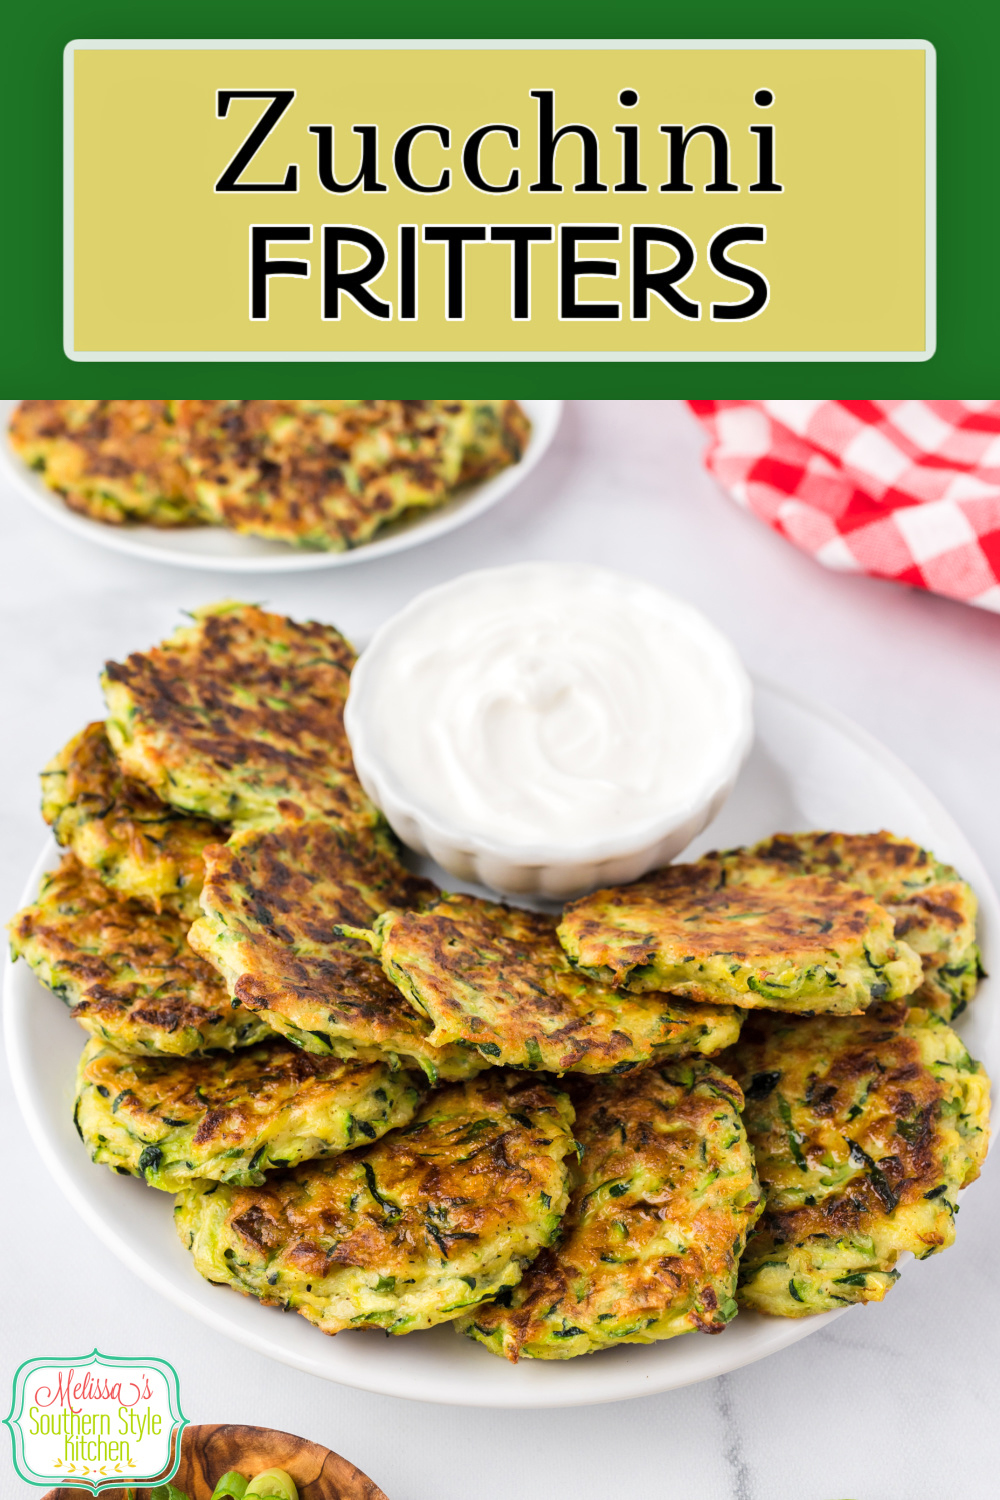 These crispy Zucchini Fritters can be served as an appetizer or a side dish with Southern comeback sauce or Ranch dressing for dipping. #zucchini #zucchinirecipes #zucchinifritters #easyzucchinifritters #southernzucchinirecipes via @melissasssk